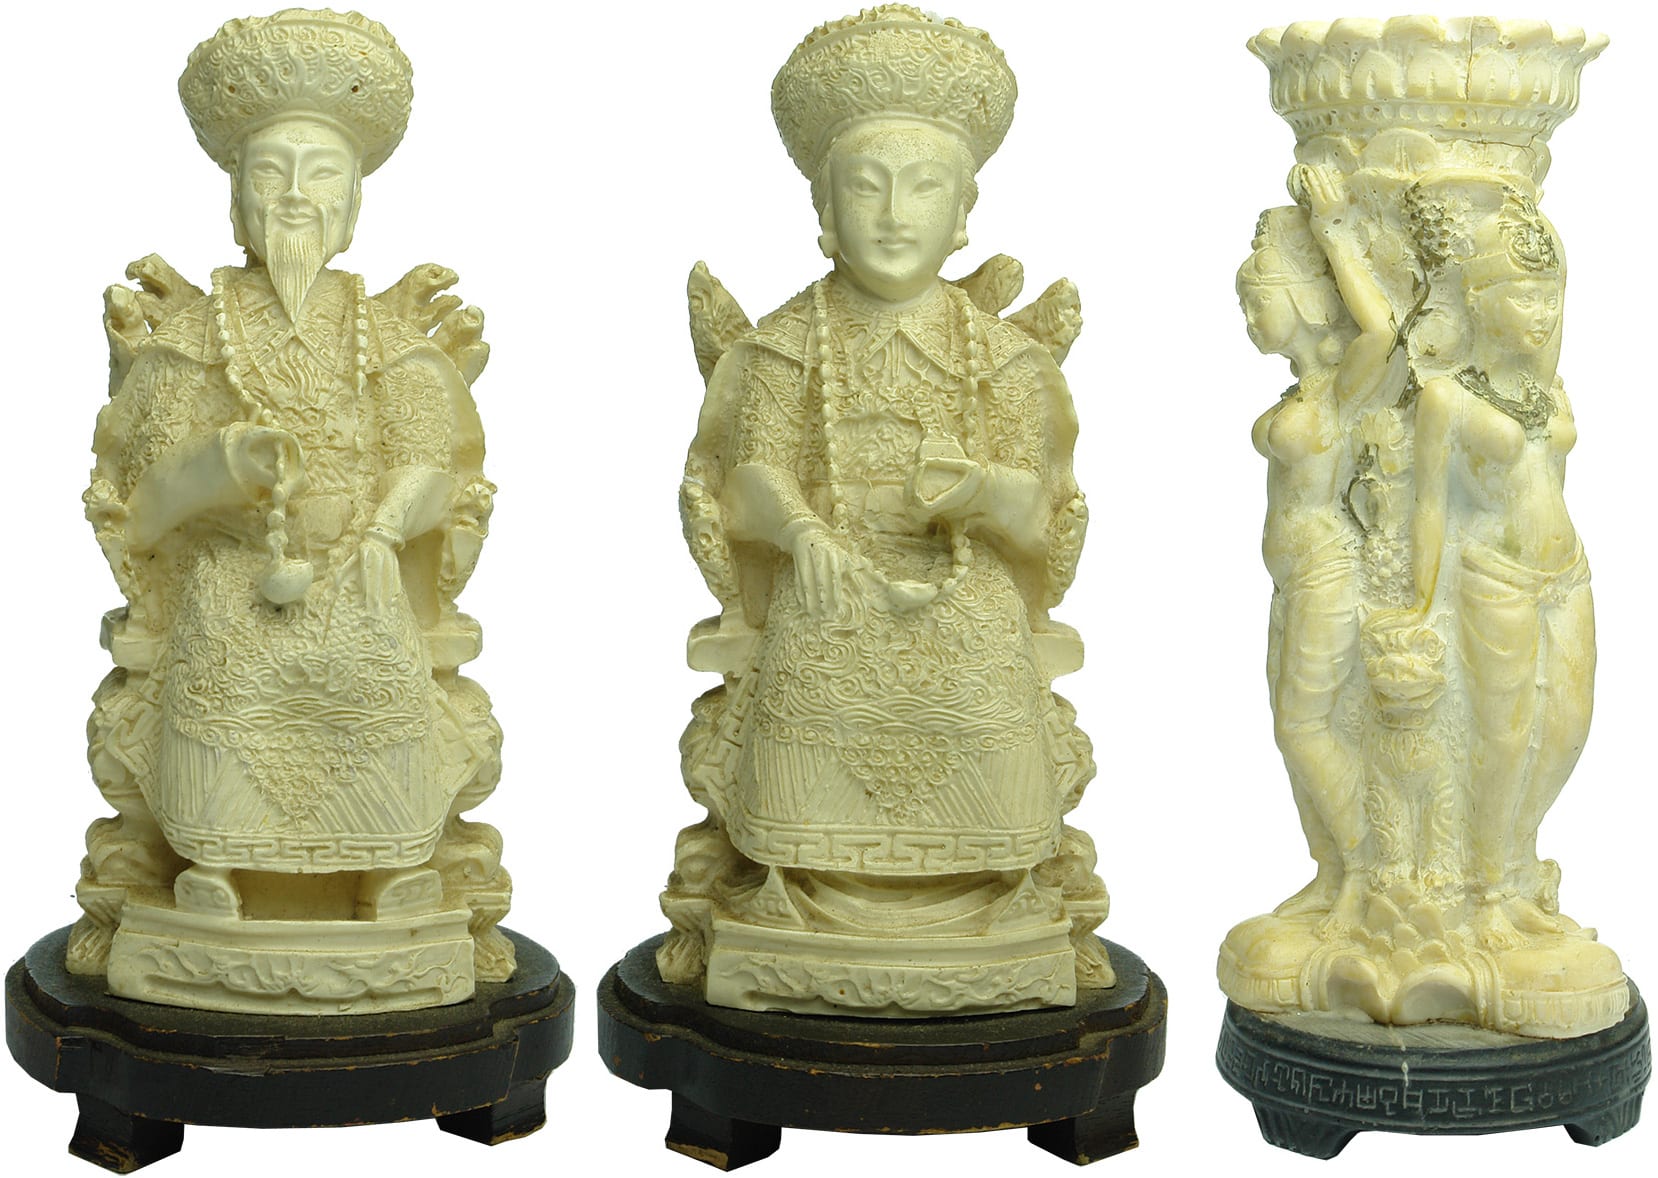 Chinese Figurines Statues Vintage